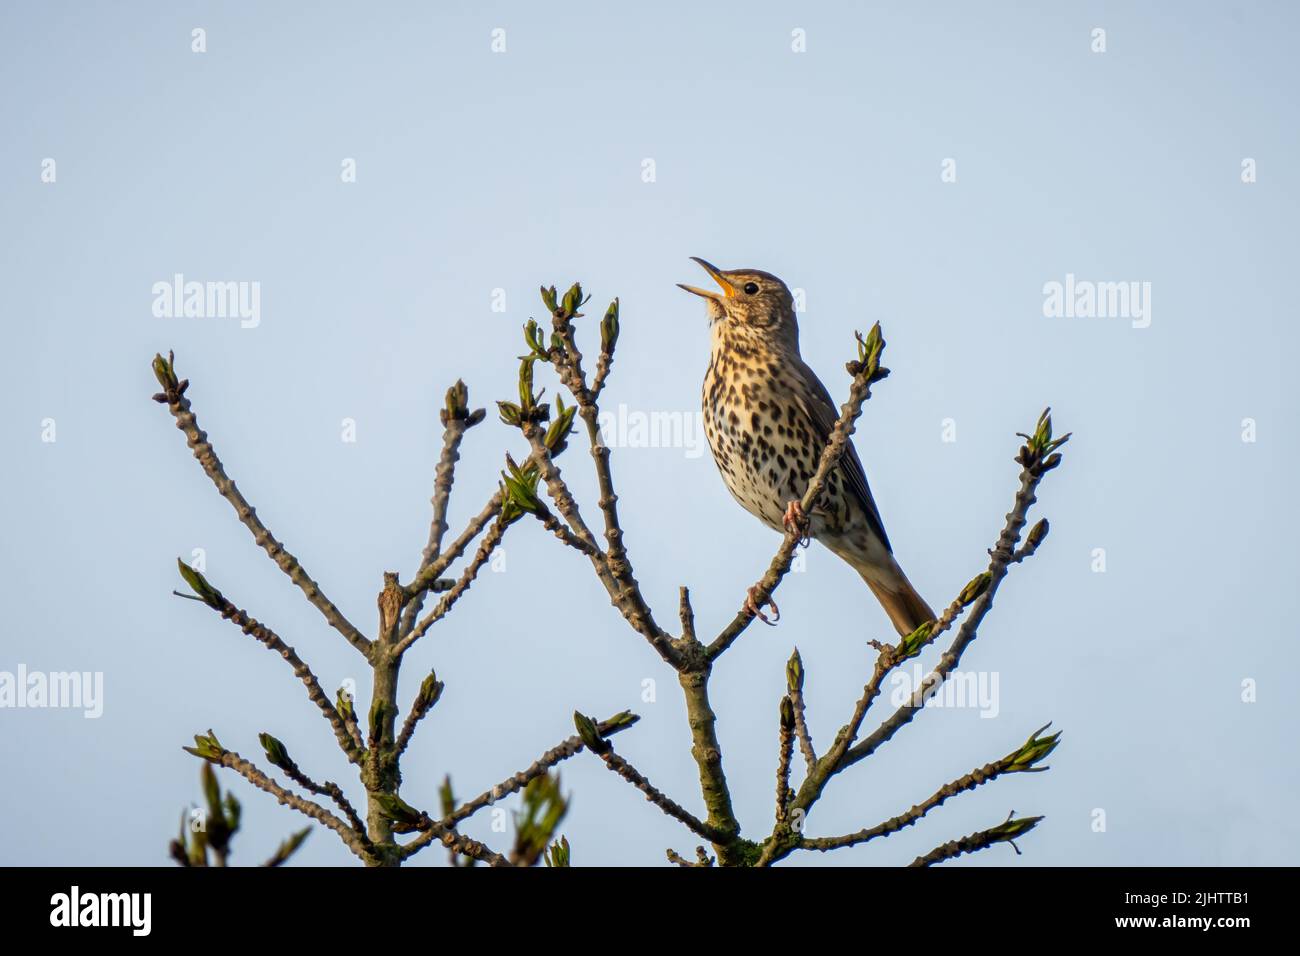 A song thrush (Turdus philomelos) singing in an ash tree in the Beddington Farmlands nature reserve in Sutton, London. Stock Photo